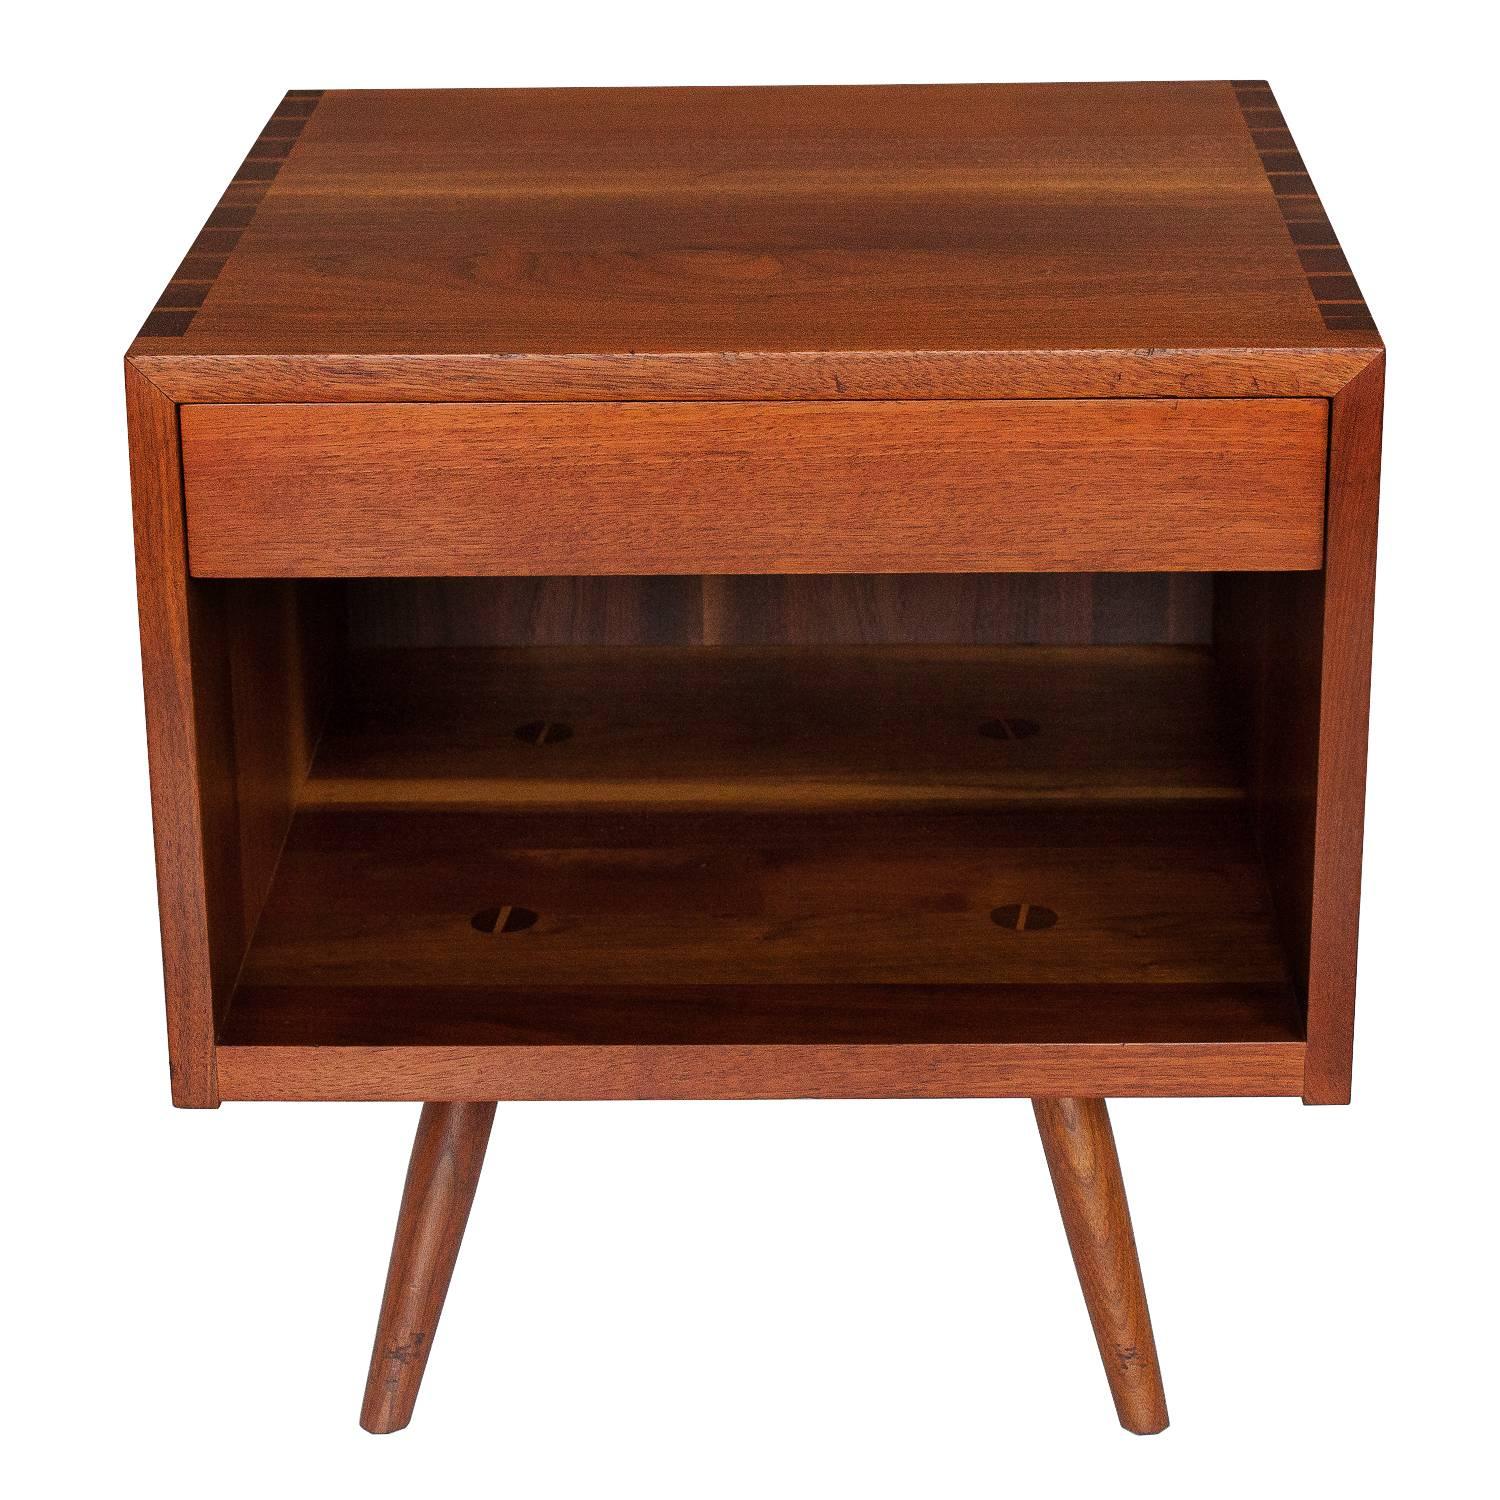 Mid-20th Century Pair of Solid Walnut Nightstands by George Nakashima